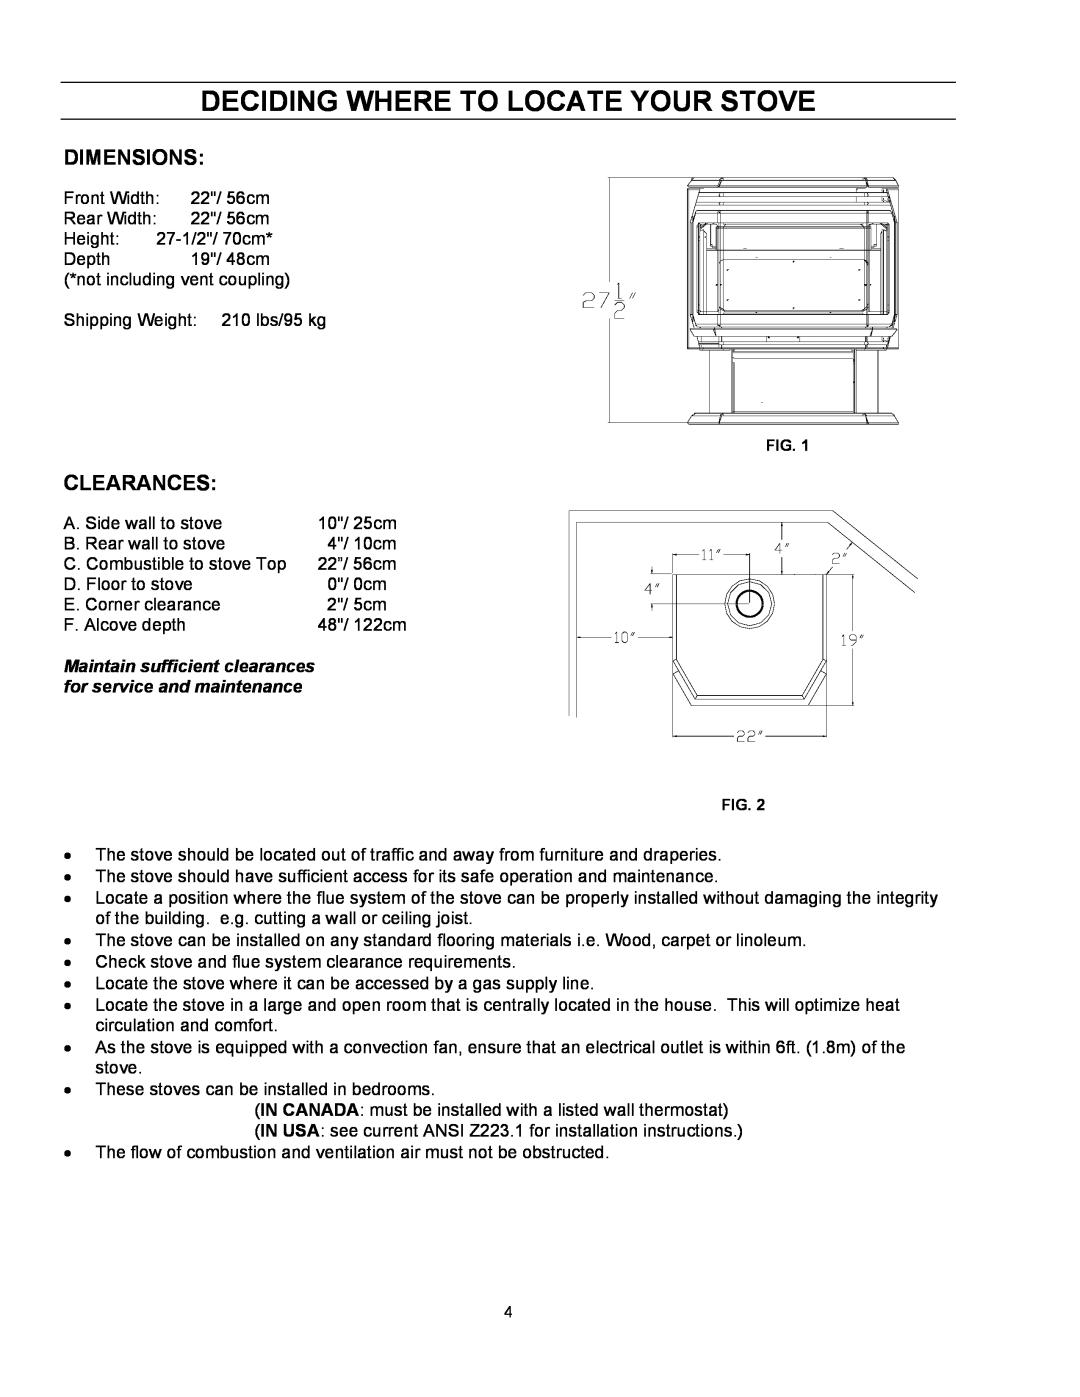 Enviro EG 28 B owner manual Deciding Where To Locate Your Stove, Dimensions, Clearances 